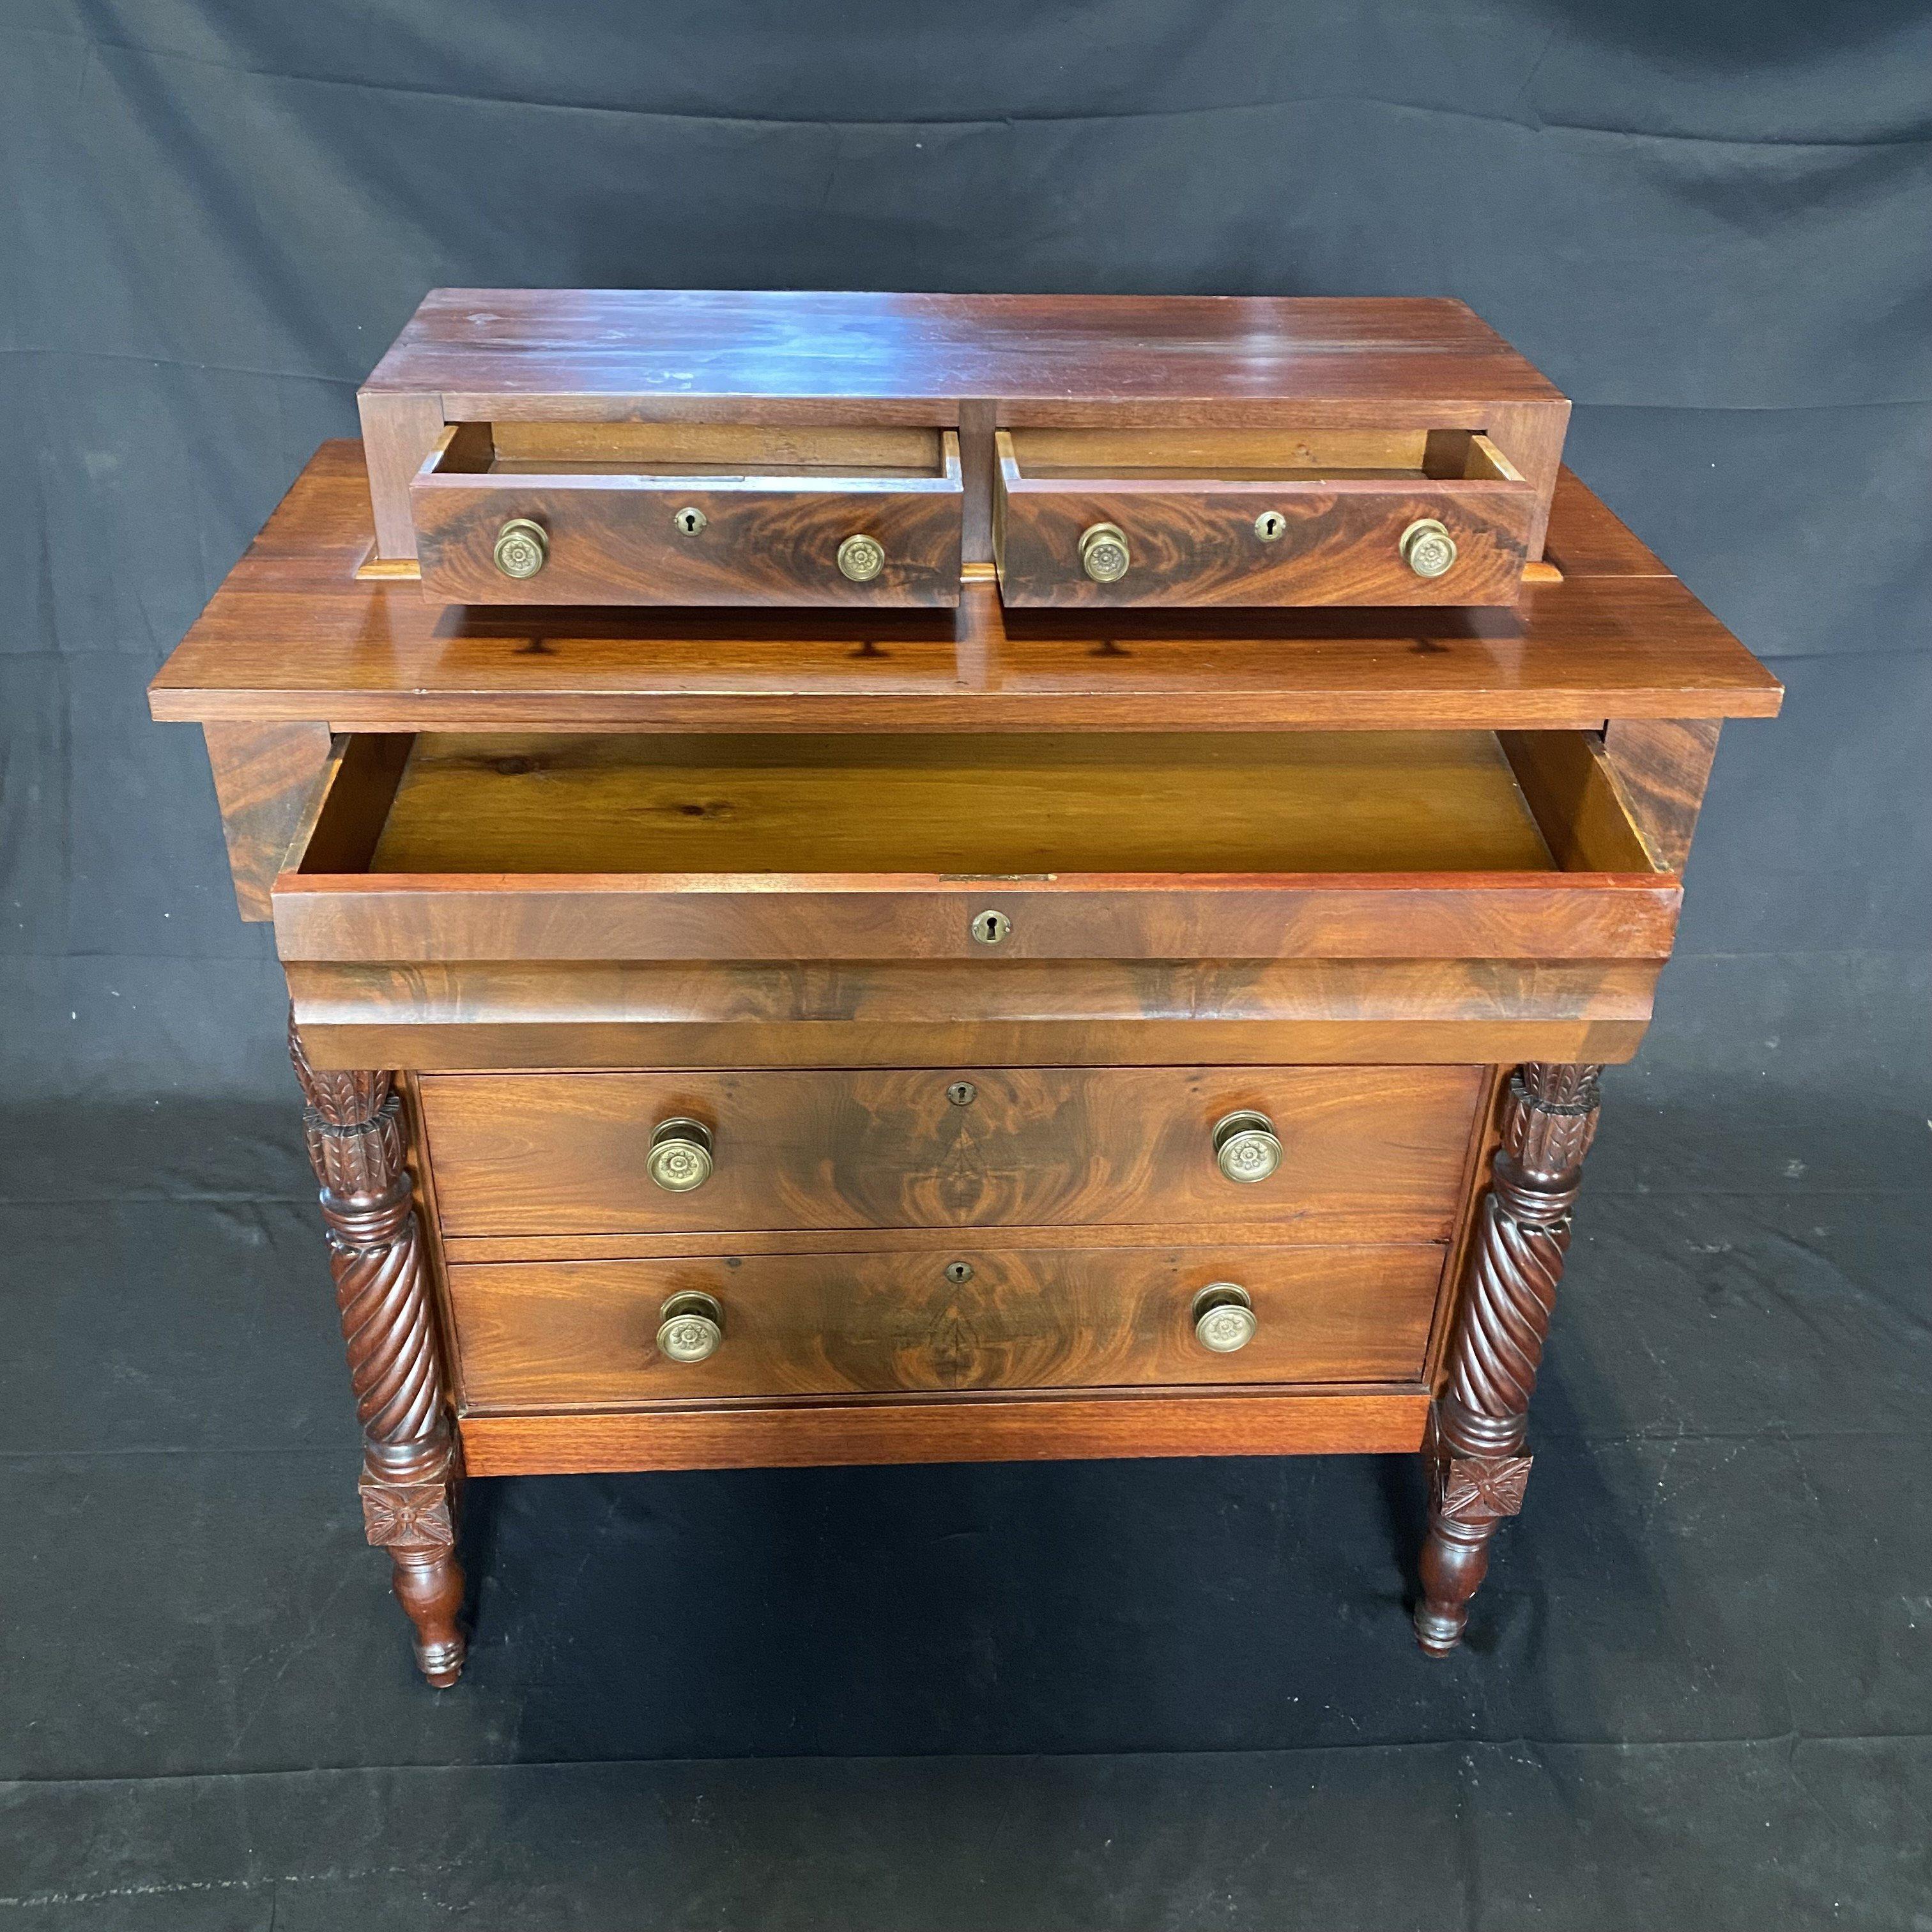 As found in Maine, this lovely Sheraton Federal step back mahogany chest presents two drawers on top with a 